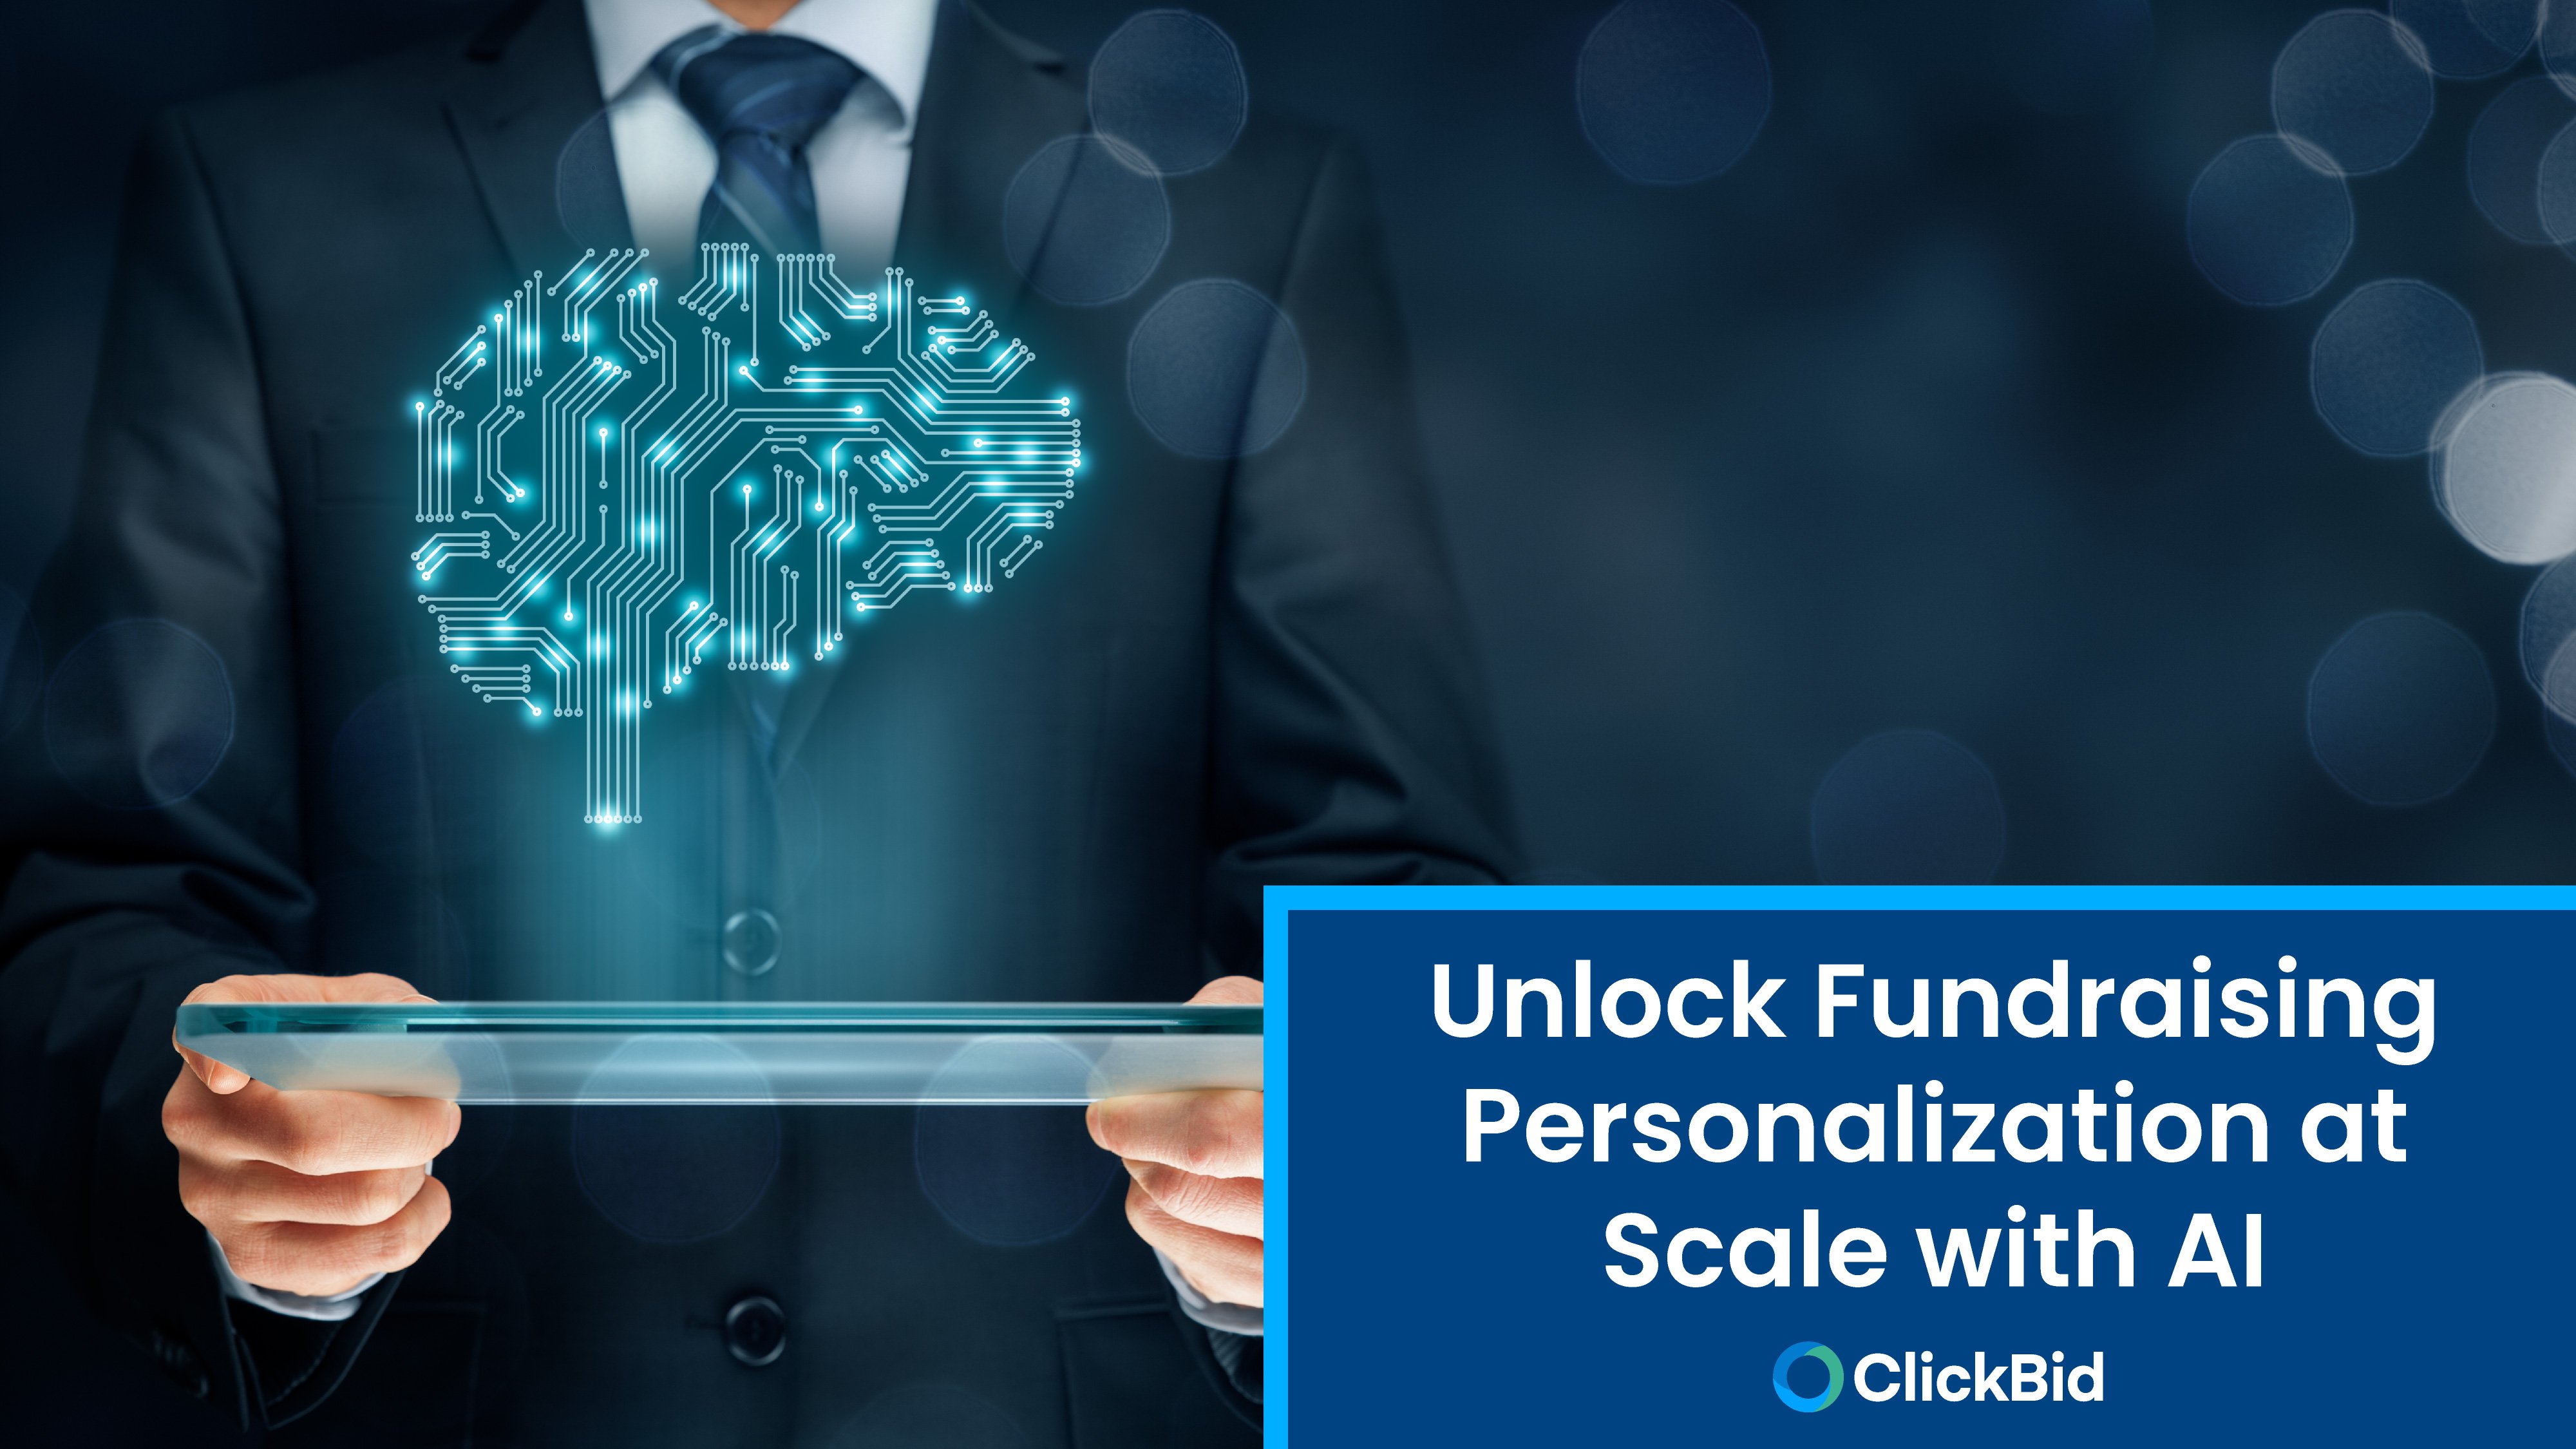 Unlock Fundraising Personalization at Scale with AI